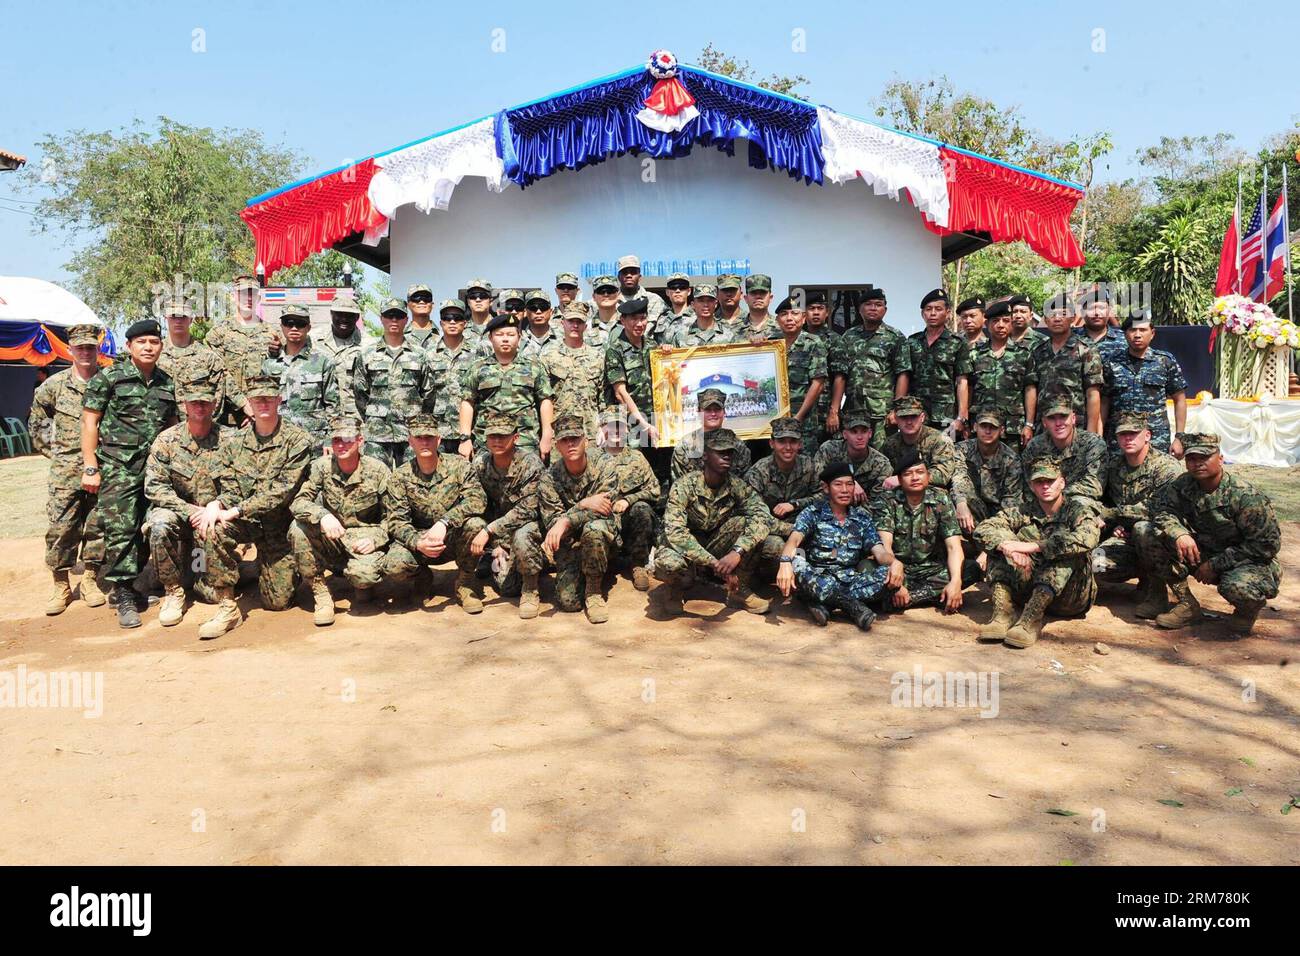 (140218) -- PITSANULOKE, Feb. 18, 2014 (Xinhua) -- Chinese , Thai and U.S. soldiers pose for a group photo during the exercise Cobra Gold 2014 at a school in Pitsanuloke Province, Thailand, Feb. 18, 2014. China has sent troops to attend the multilateral military exercise Cobra Gold, led by the United States and Thailand, for the first time. The seventeen-strong Chinese squad will take part in operations at the command and coordination center, engineering assistance, medical aid as well as discussions and exchanges of military medical sciences, according to officers with the foreign affairs off Stock Photo